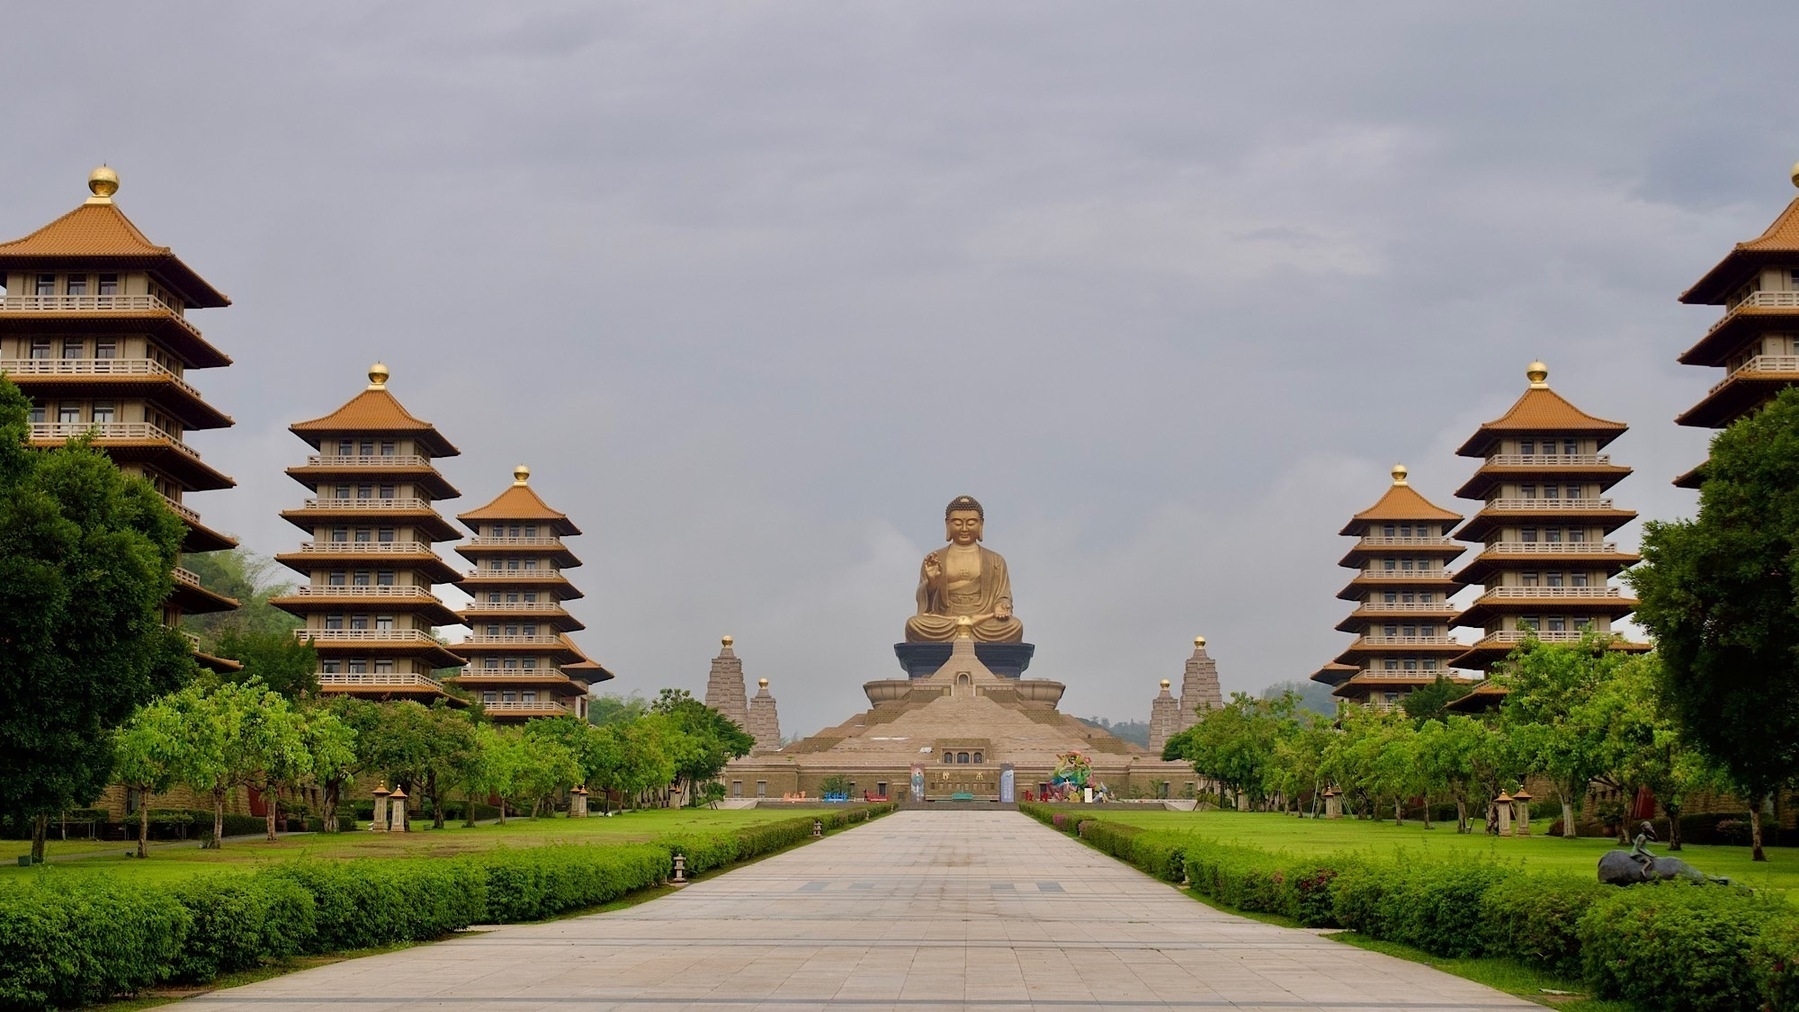 Wide avenue lined by pagodas leading to a giant statue of the Buddha